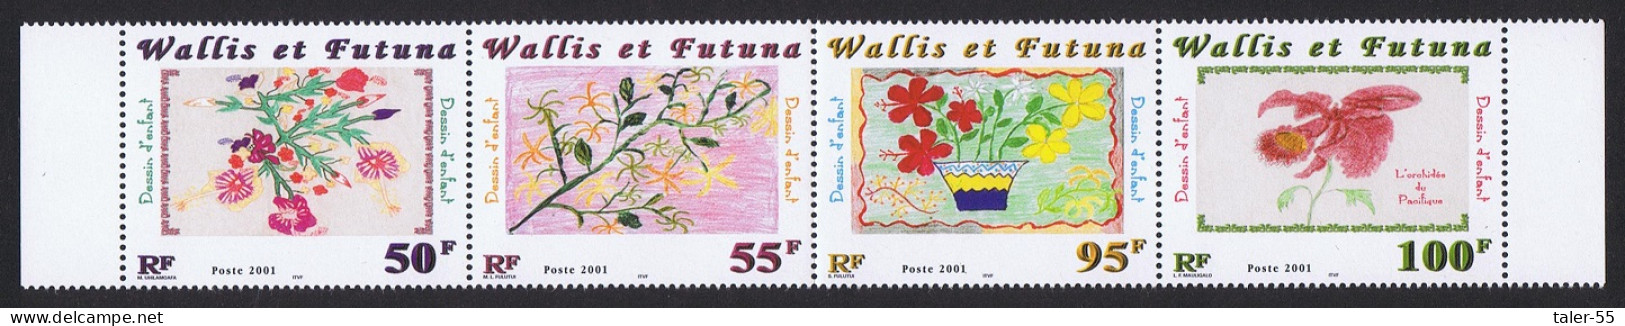 Wallis And Futuna Flowers Strip Of 4v 2001 MNH SG#779-782 Sc#540 - Unused Stamps